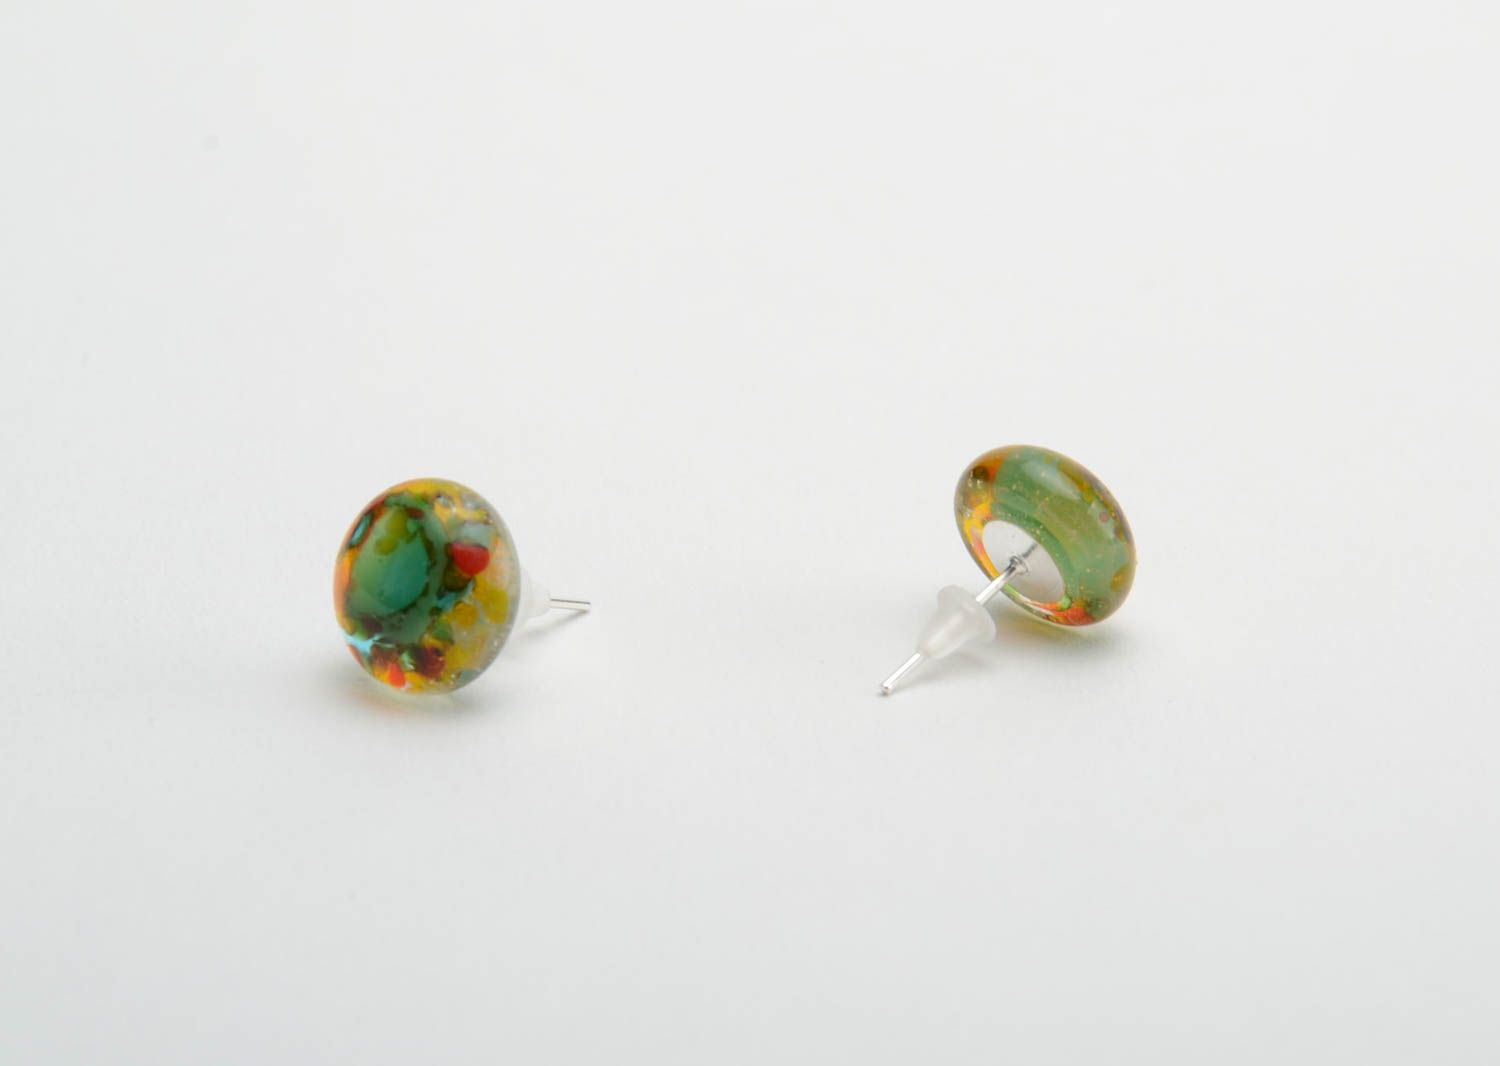 Beautiful handmade colorful stud earrings made using glass fusing technique photo 3